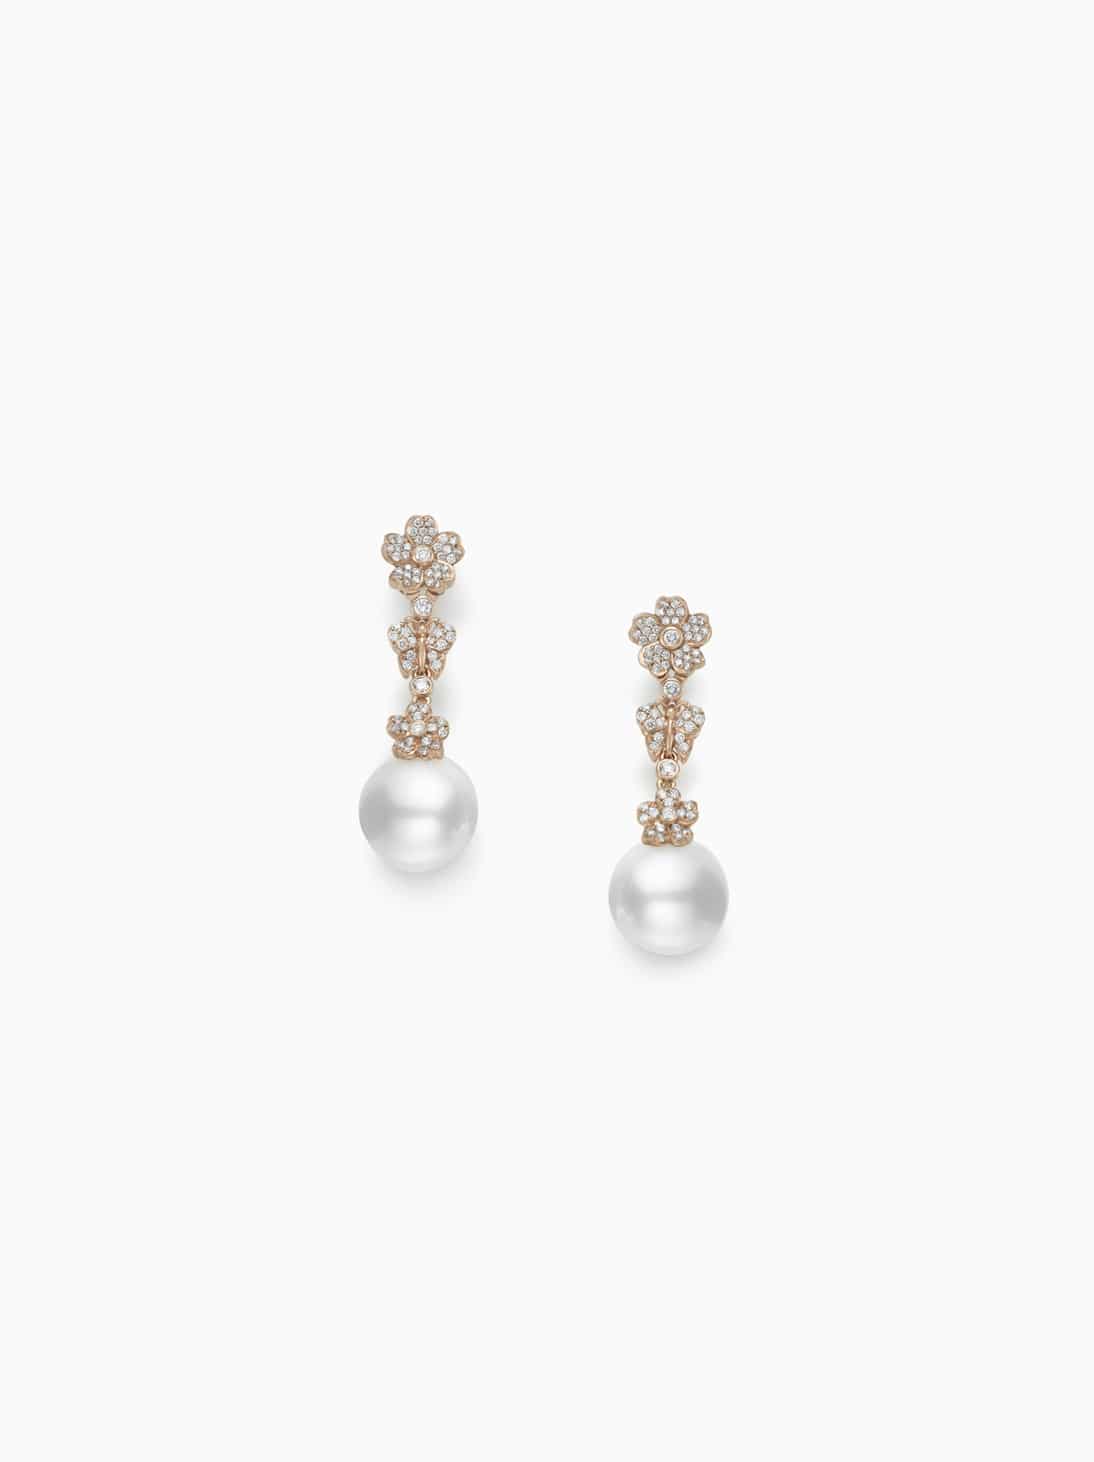 Mikimoto Akoya Cultured Pearl and Diamond Cherry Blossom Earrings in Pink Gold